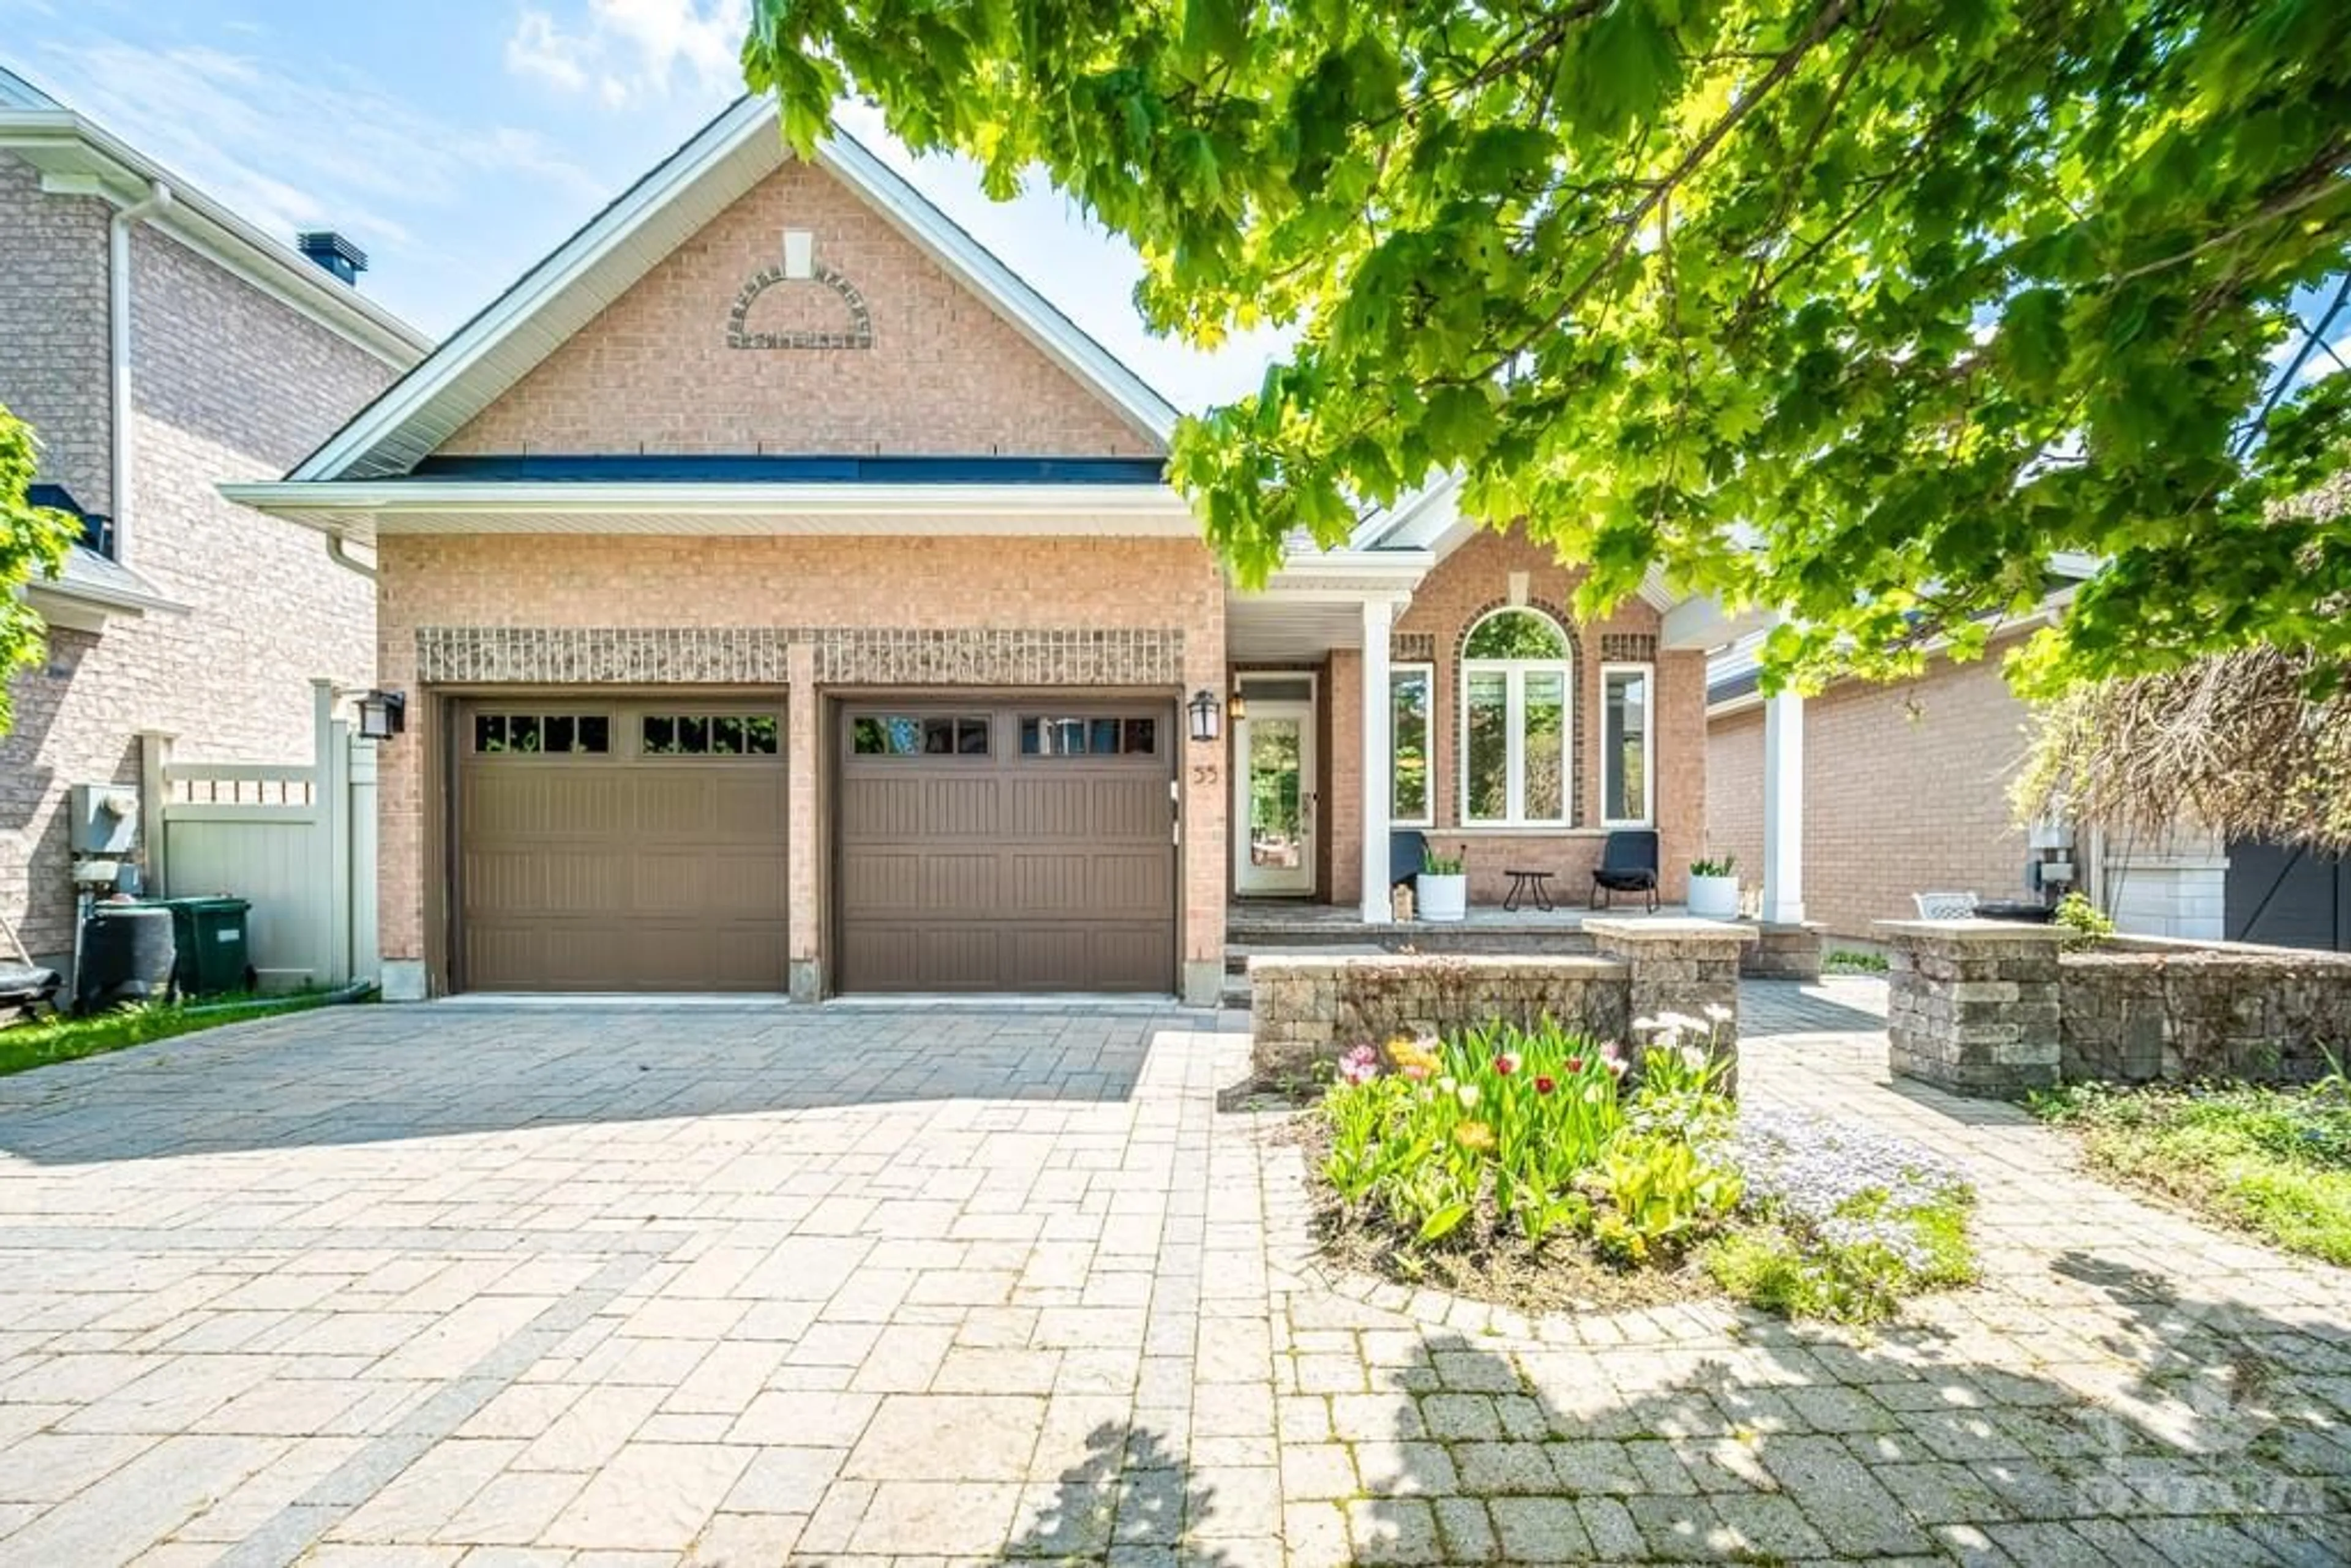 Home with brick exterior material for 55 GRENWICH Cir, Ottawa Ontario K2C 4G1